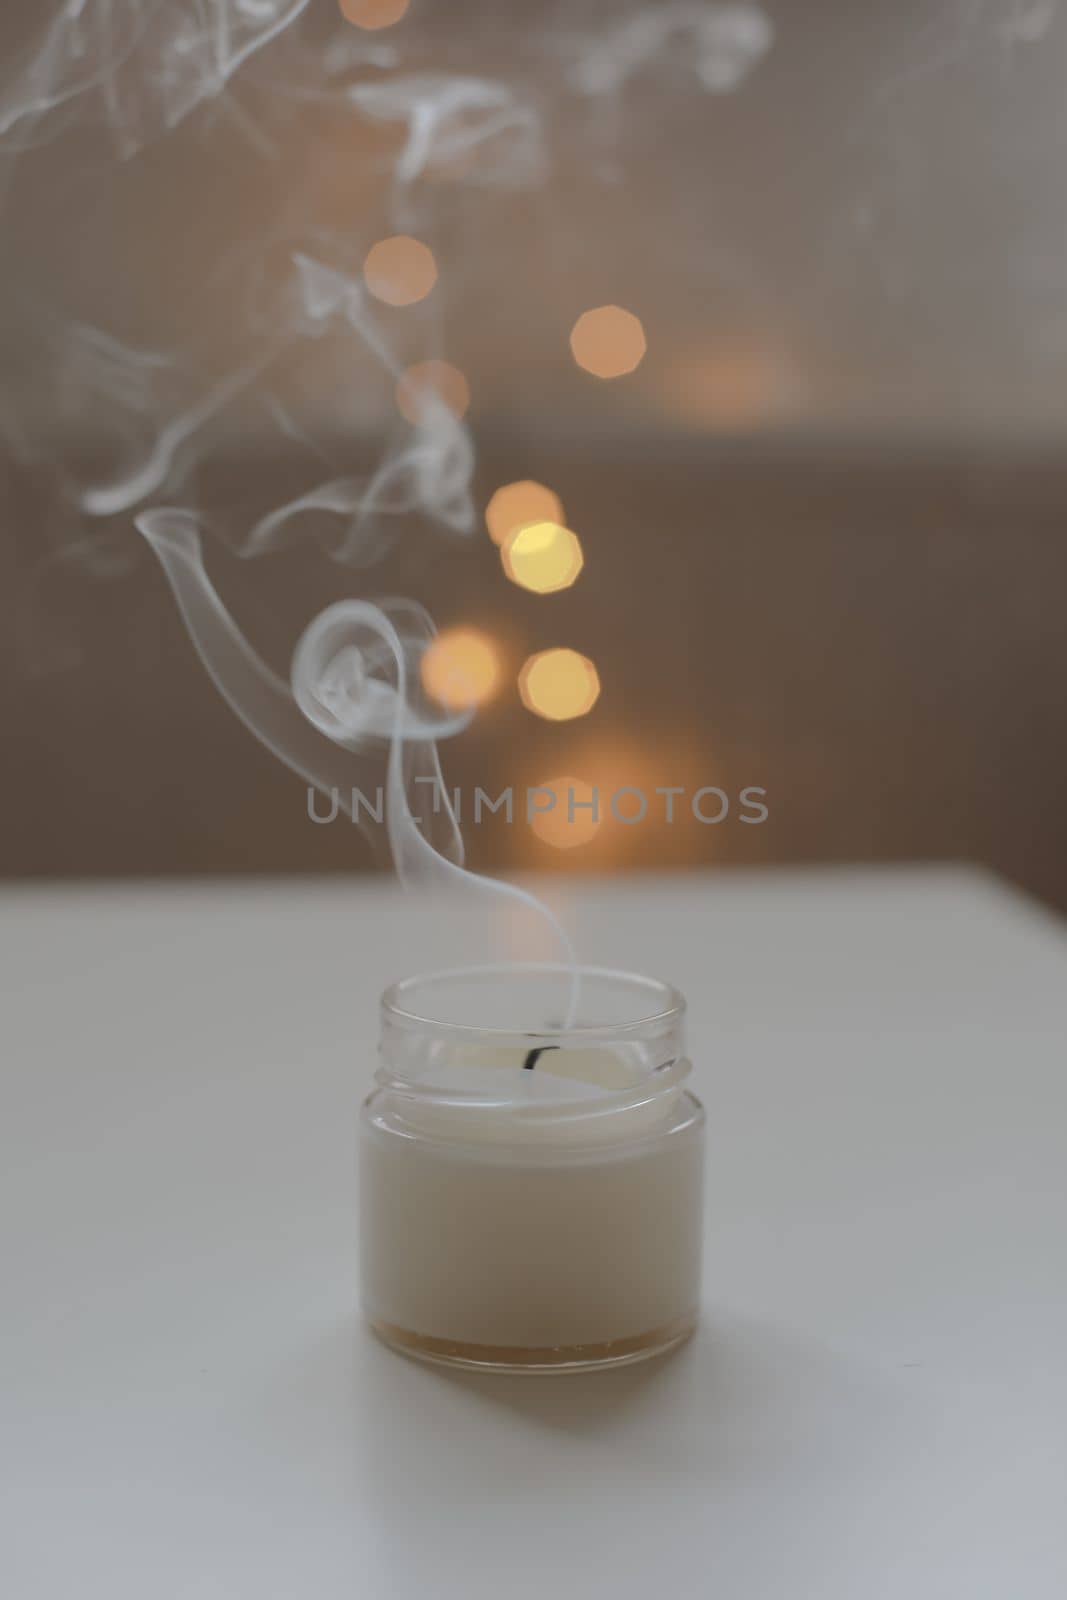 Cozy home composition with candle on a blurred background.